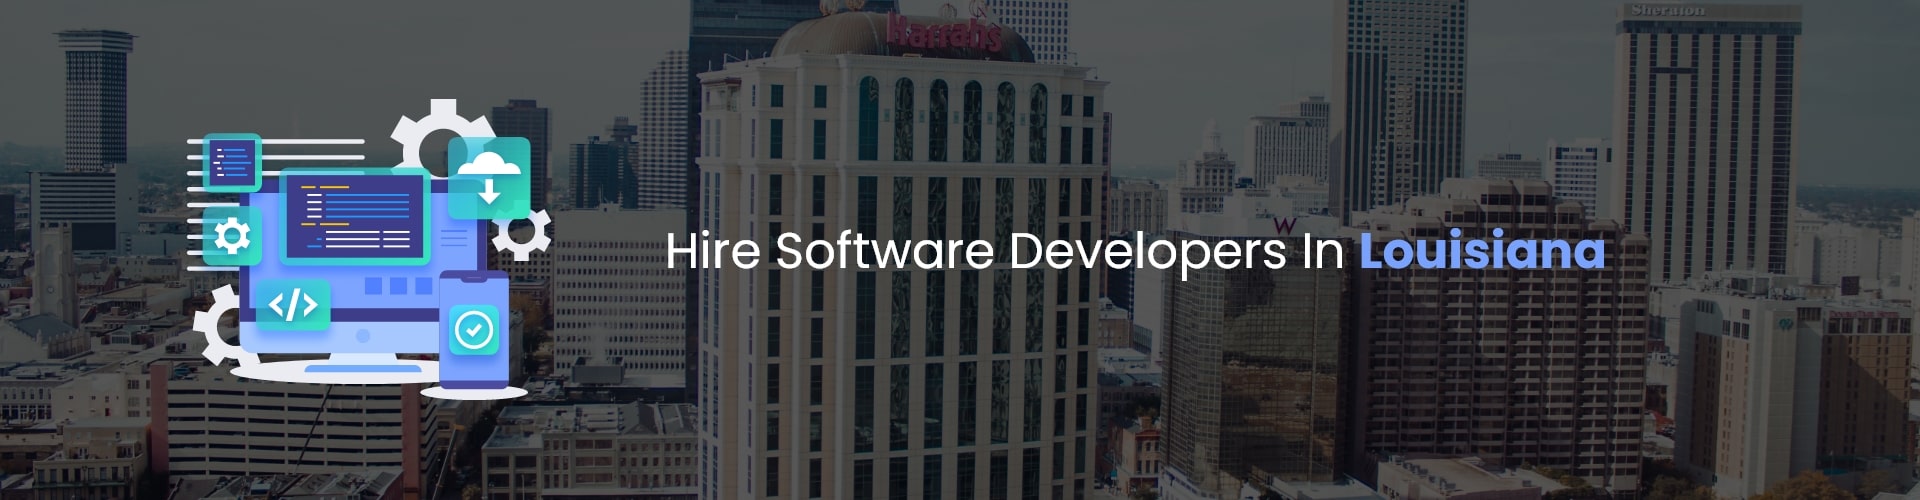 hire software developers in louisiana